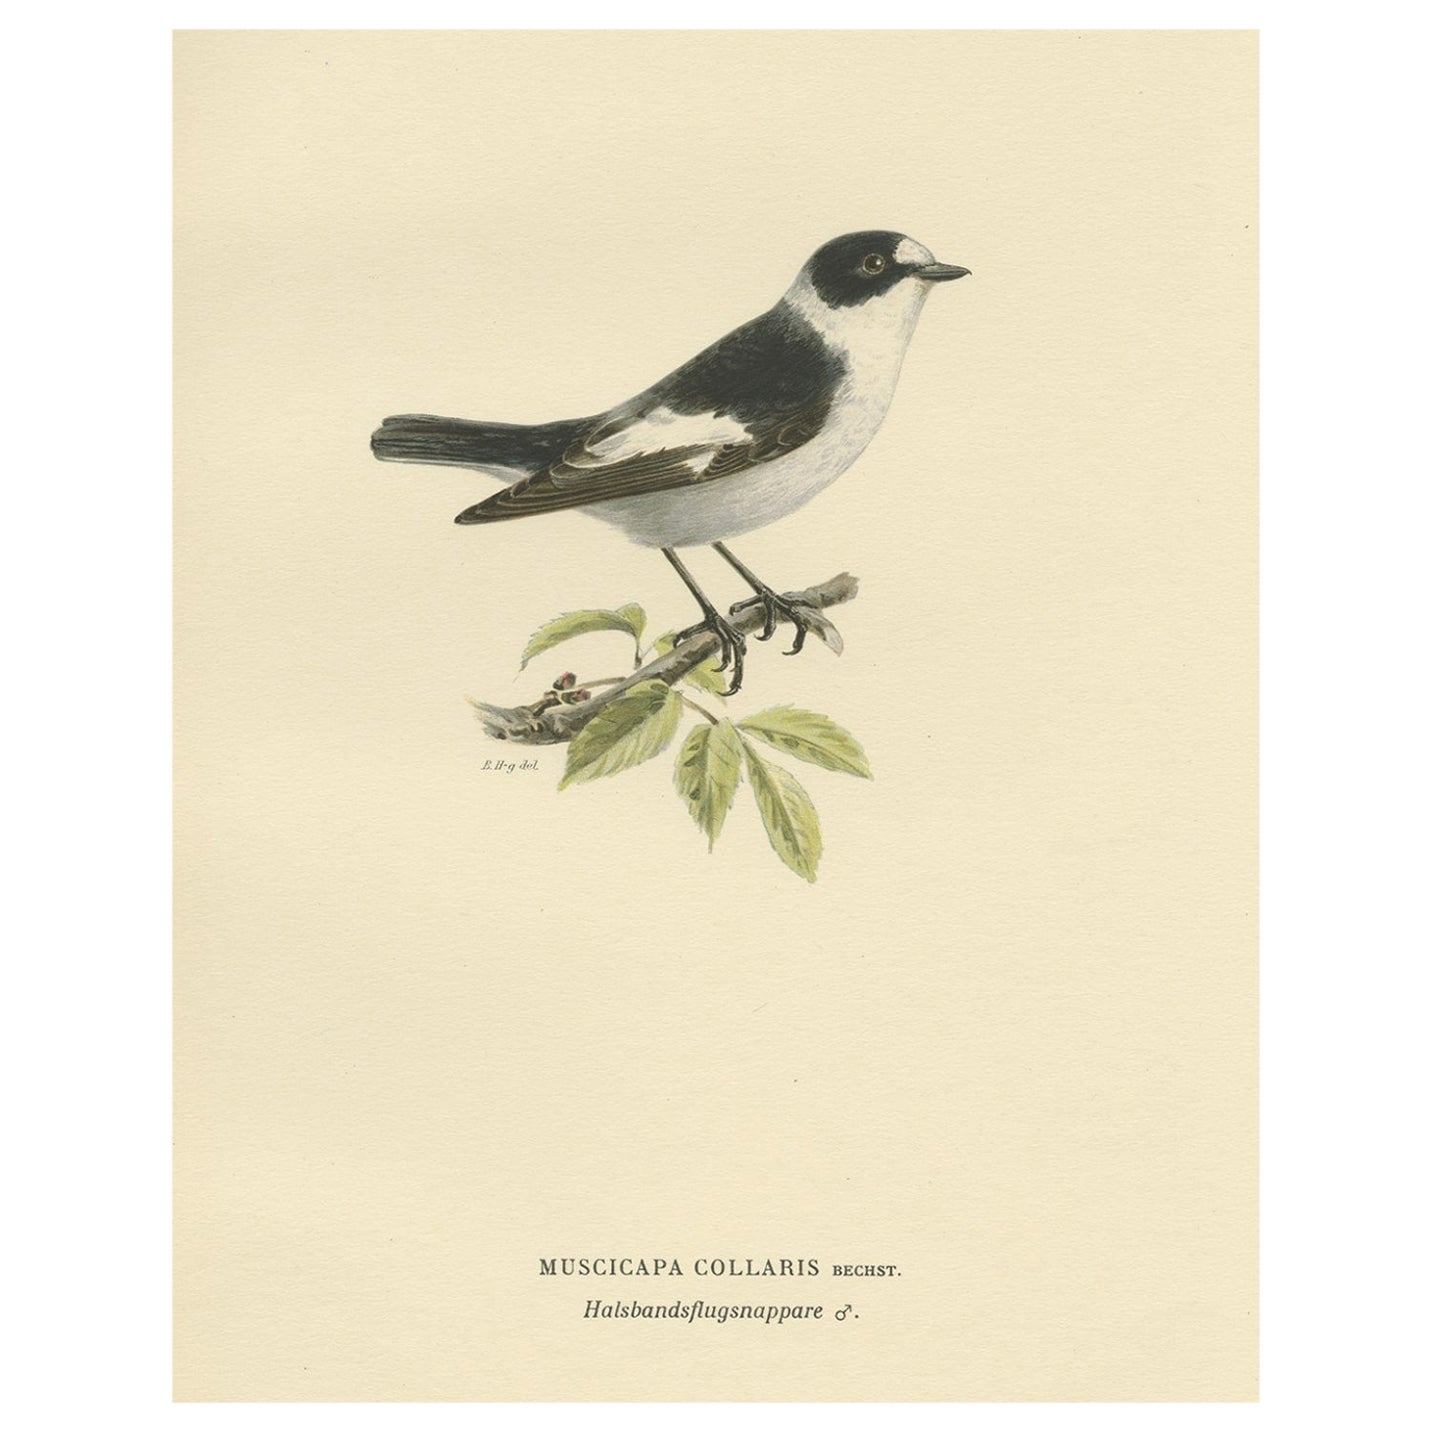 Original Old Bird Print Depicting the White-Collared Flycatcher, 1927